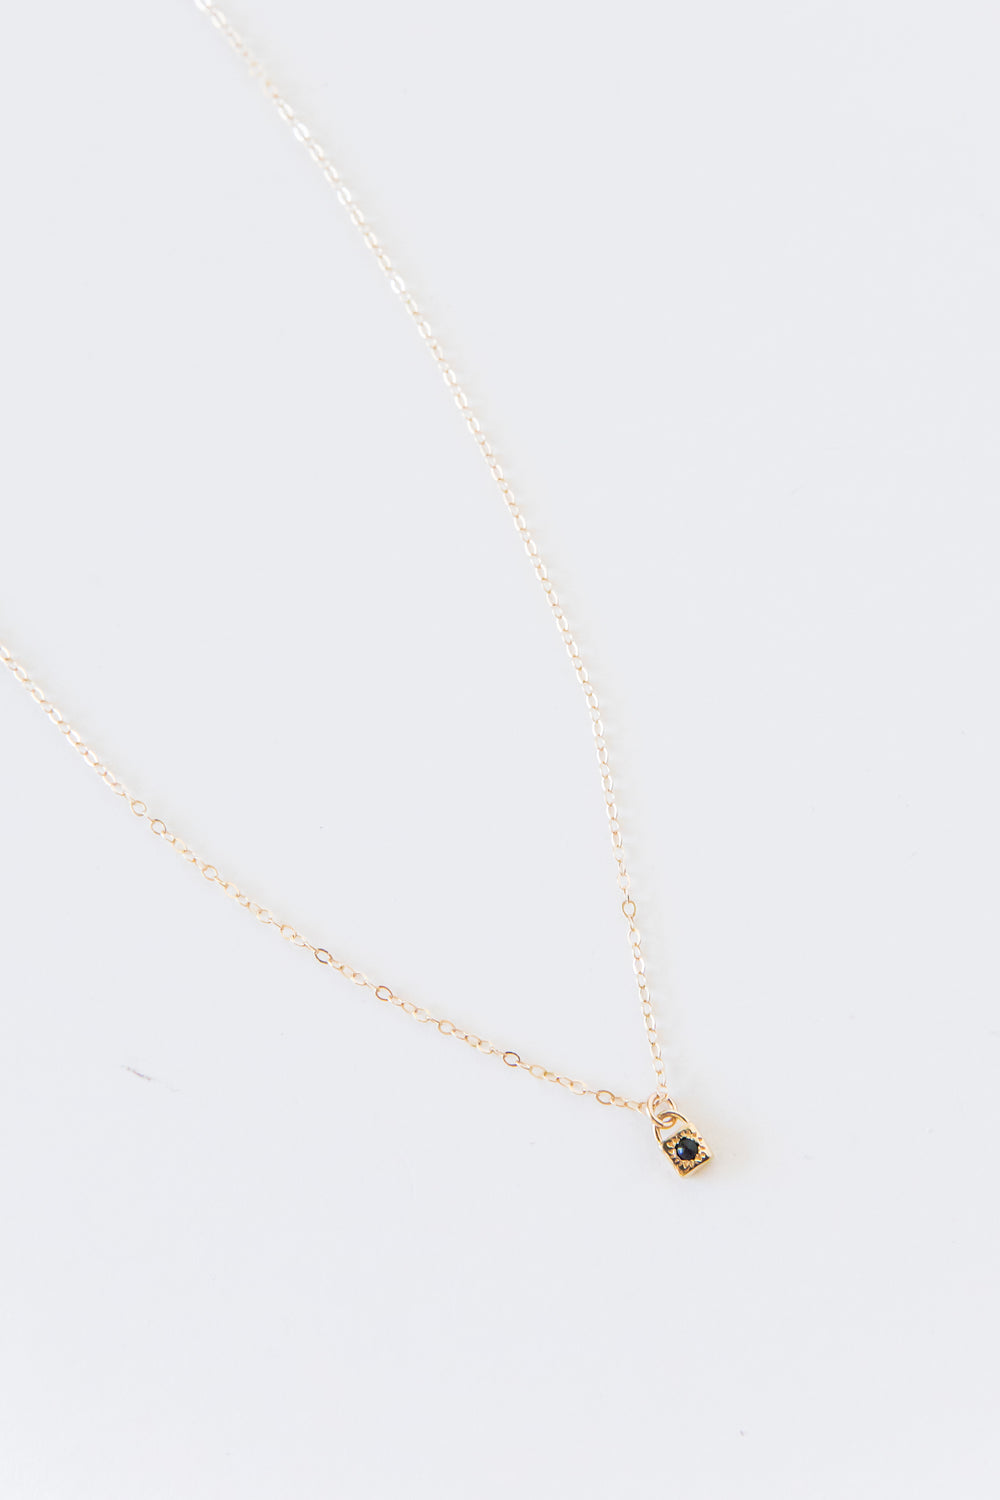 Gold Onyx Loner Necklace